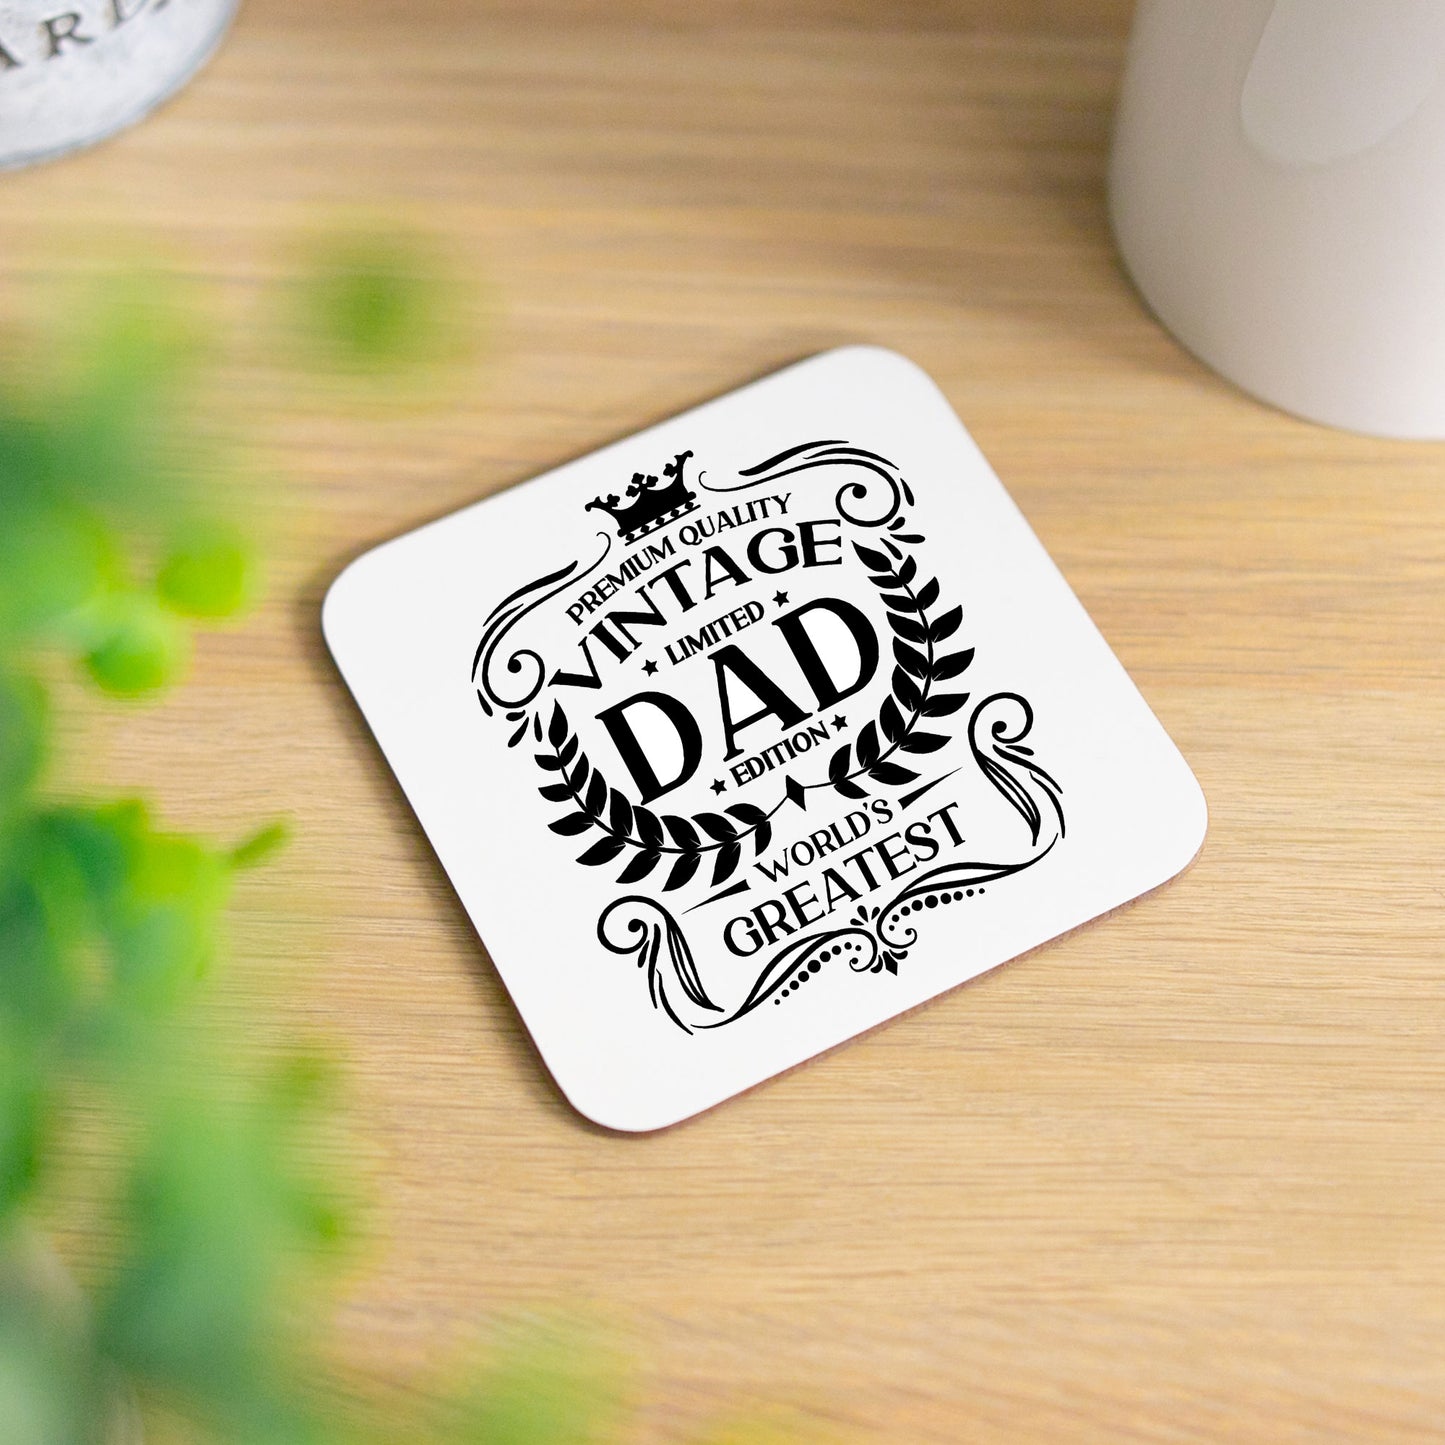 Vintage World's Greatest Dad Engraved Whisky Glass  - Always Looking Good - Glass & Printed Coaster  